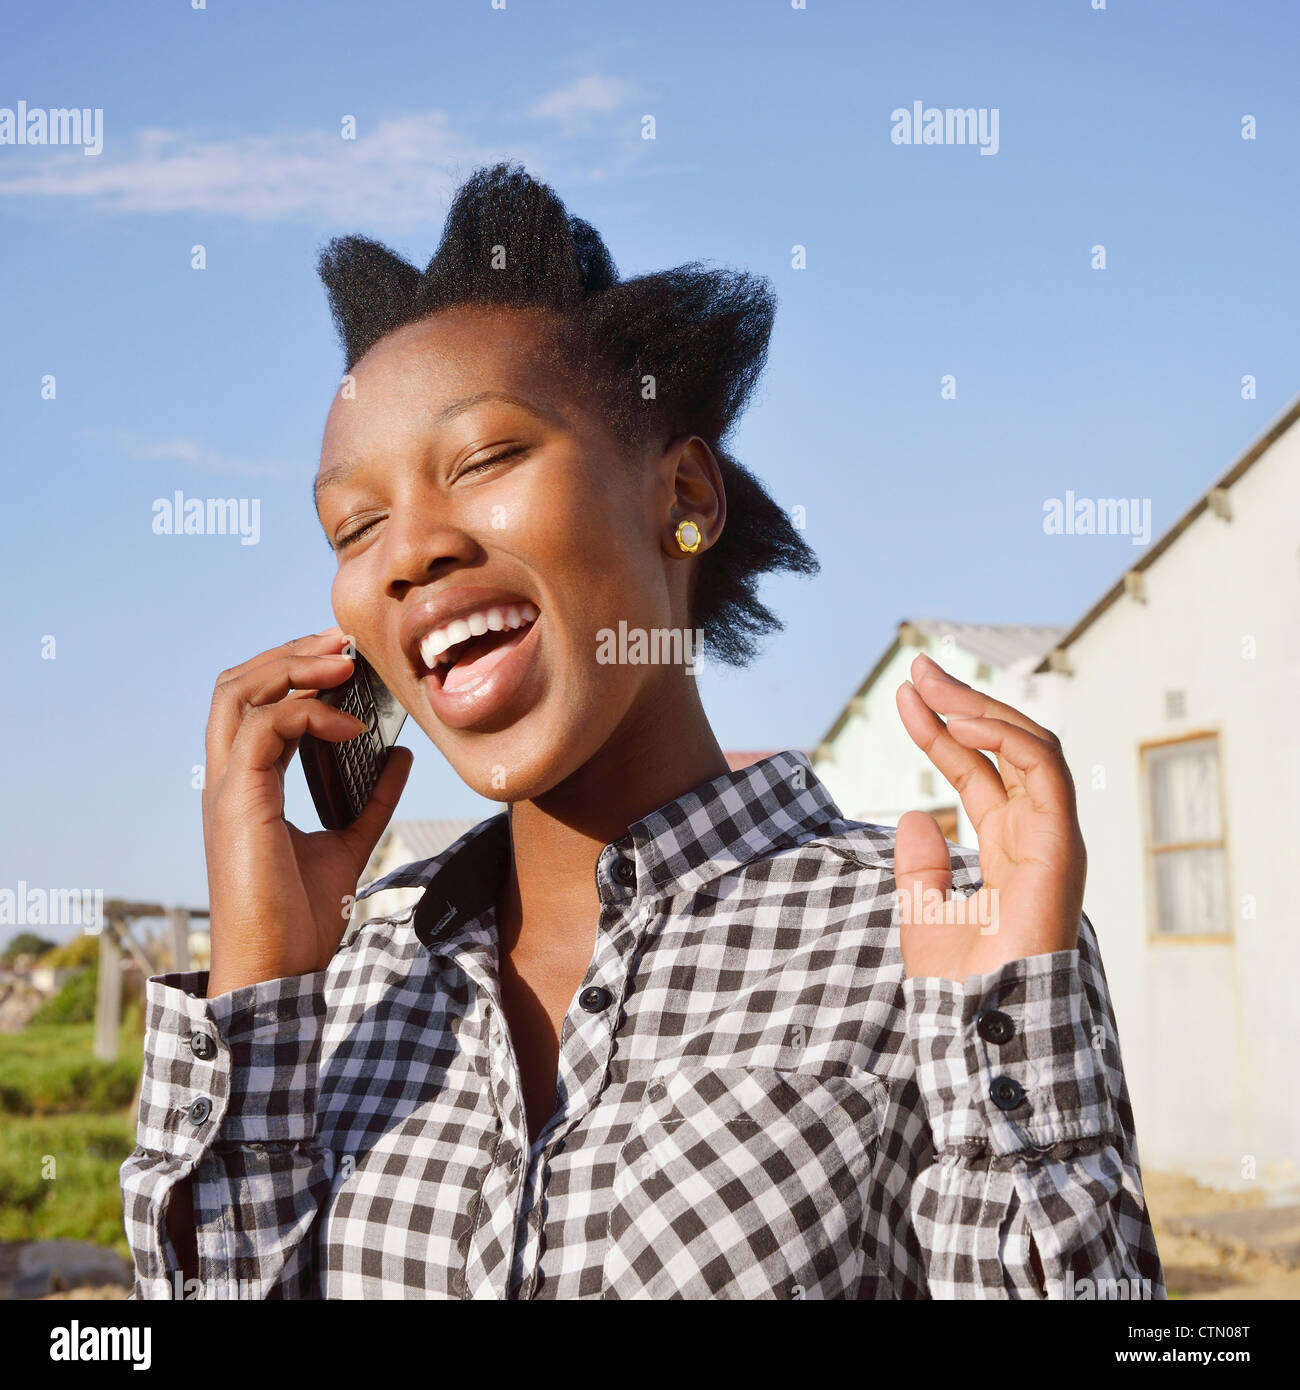 Woman with spiky hair chatting on a mobile phone, Gugulethu, Cape Town Stock Photo